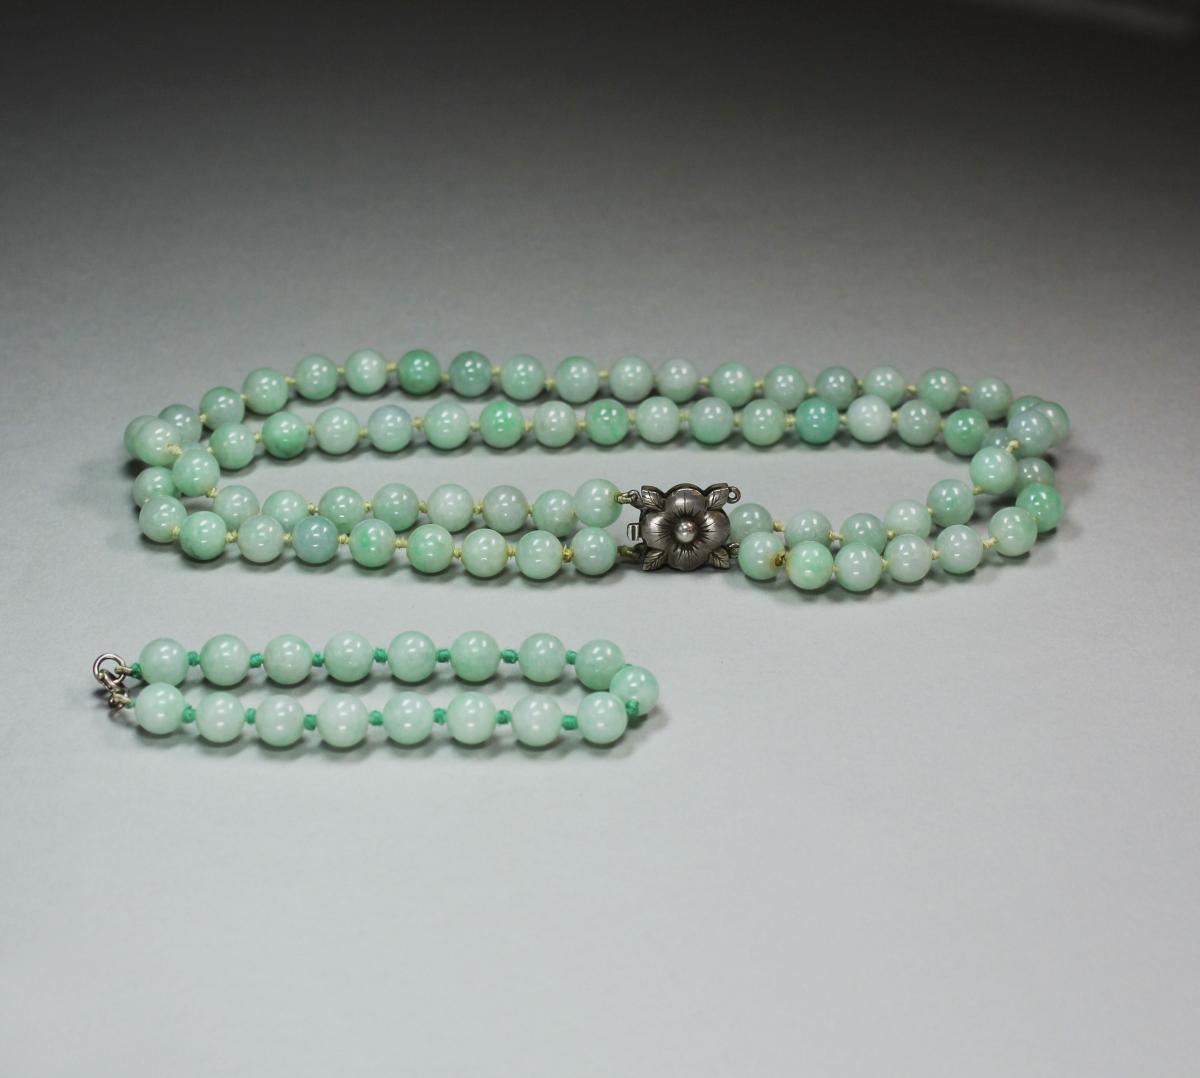 Chinese jade bead necklace and bracelet